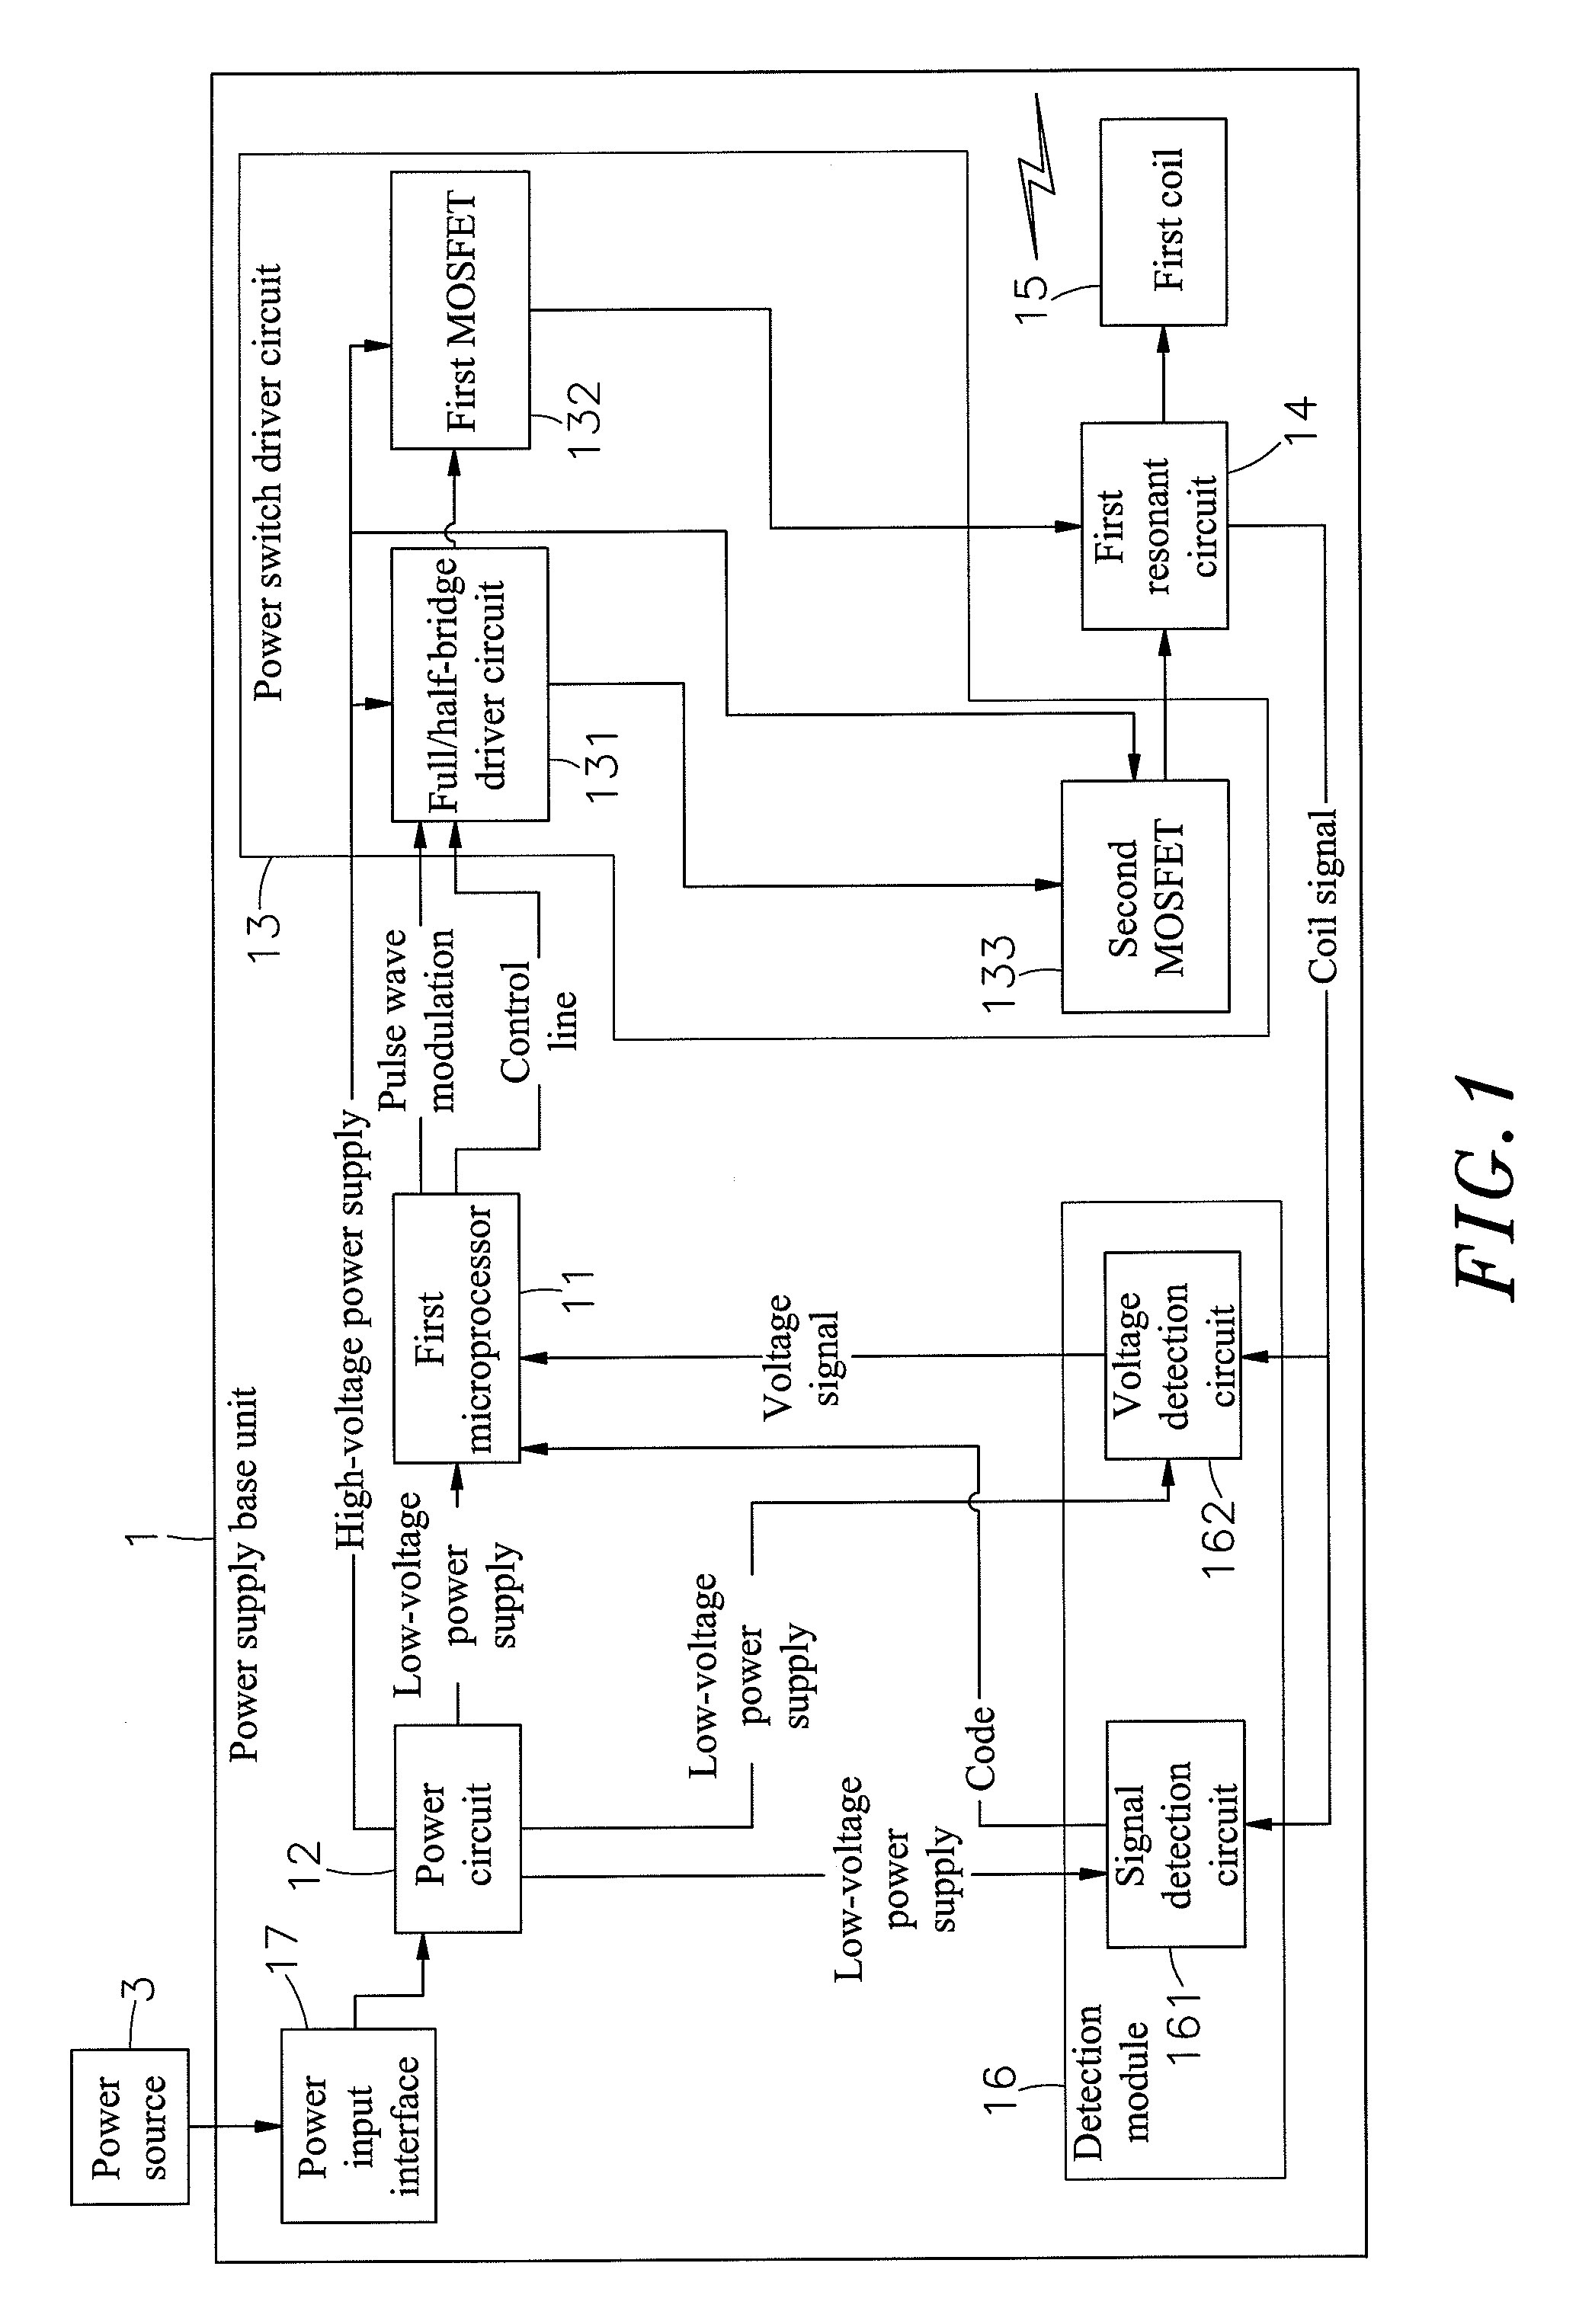 Frequency modulation type wirelss power supply and charger system